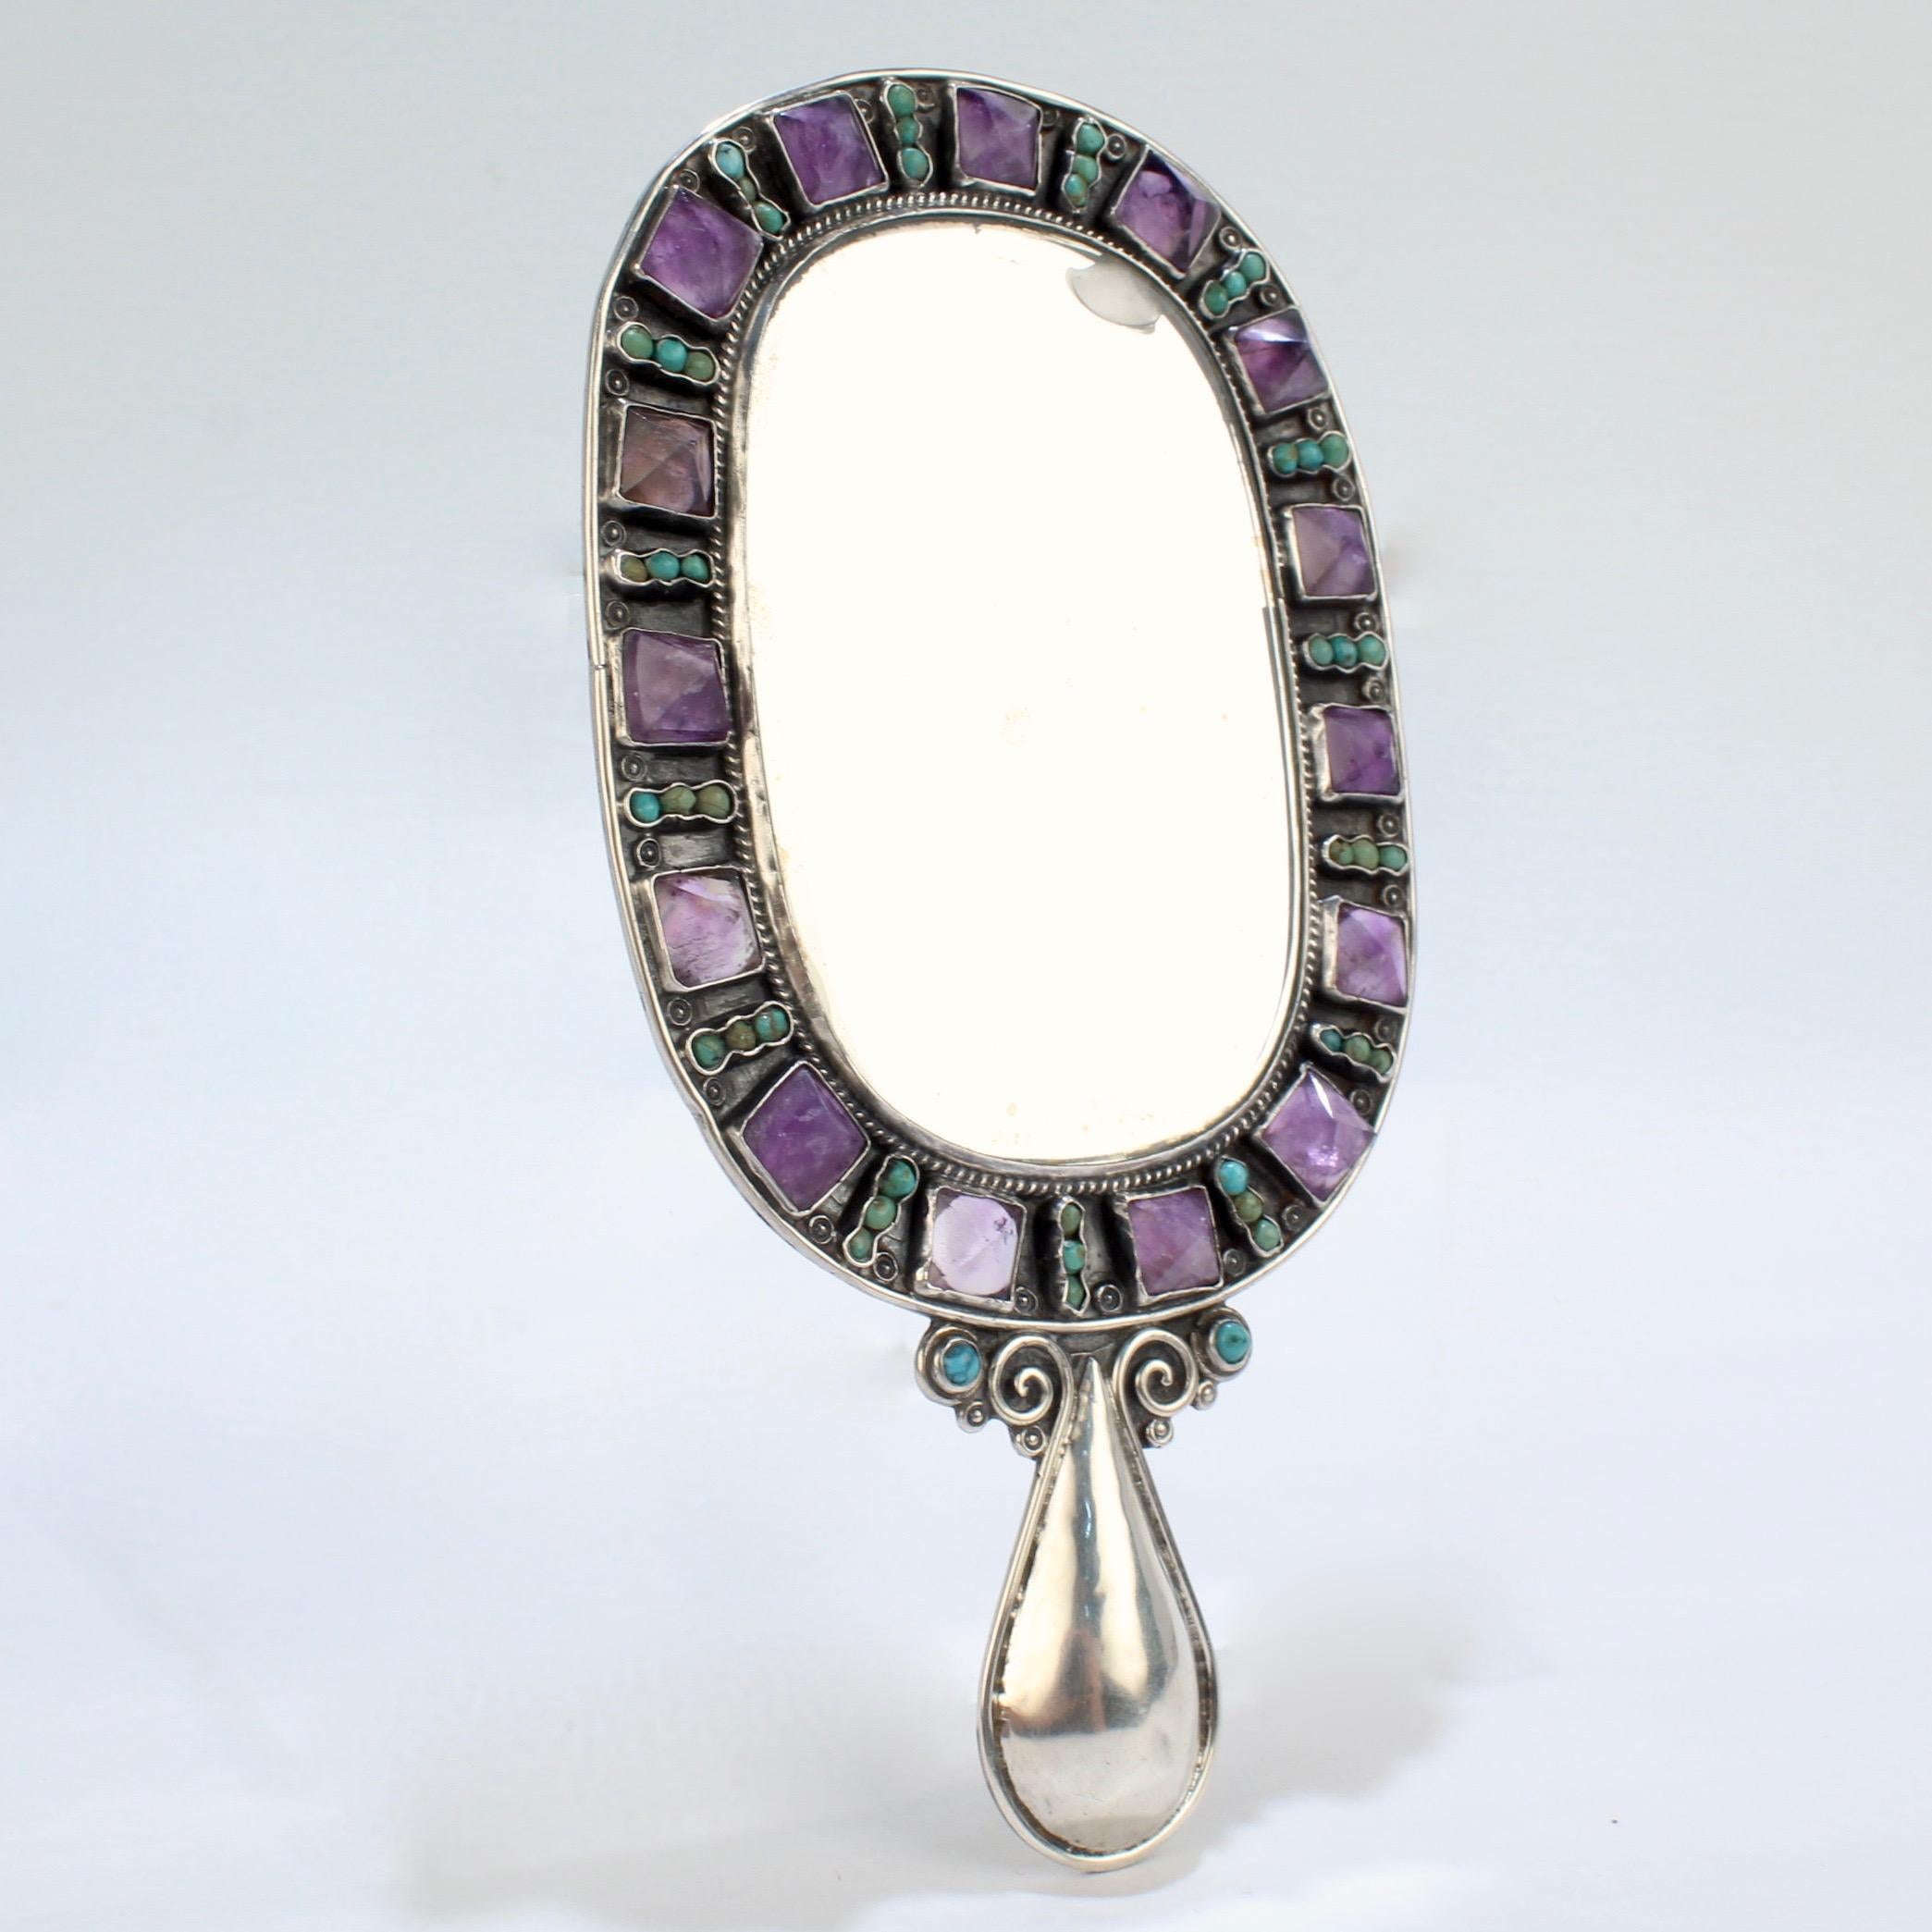 A rare small-scale hand mirror by Matilde Poulat.

The mirror is set in sterling silver and surrounded by pyramid shaped amethyst and round turquoise gemstones. 

Matilde Poulat's work is amongst the most desirable of the Mid-Century Mexican